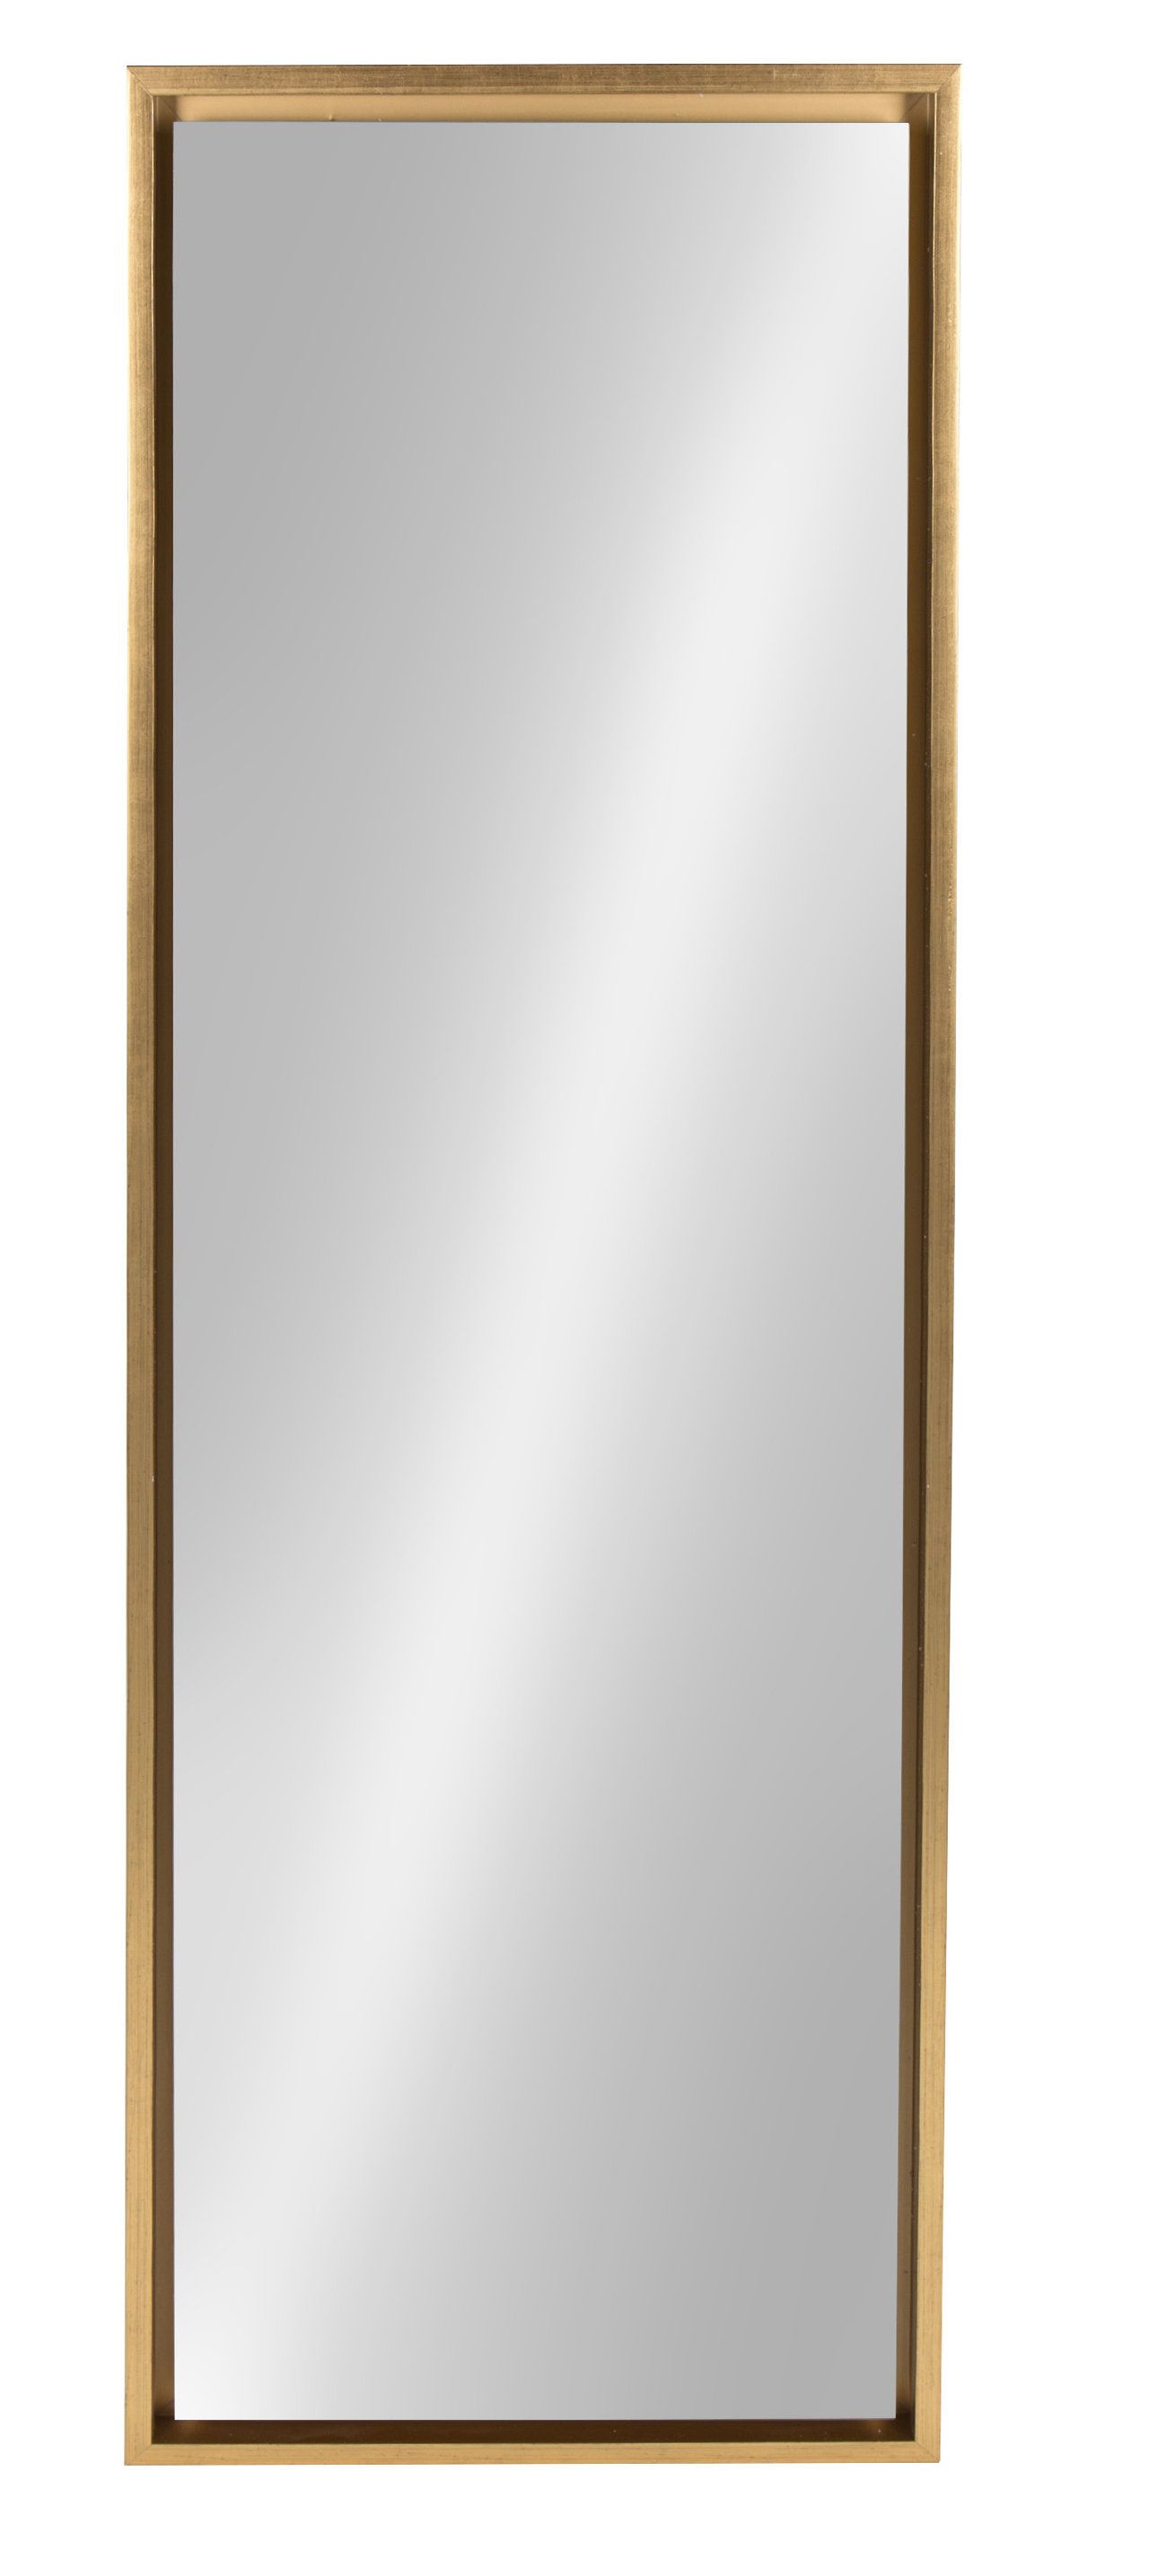 Framed Wall & Accent Mirrors | Allmodern Within Marion Wall Mirrors (View 10 of 30)